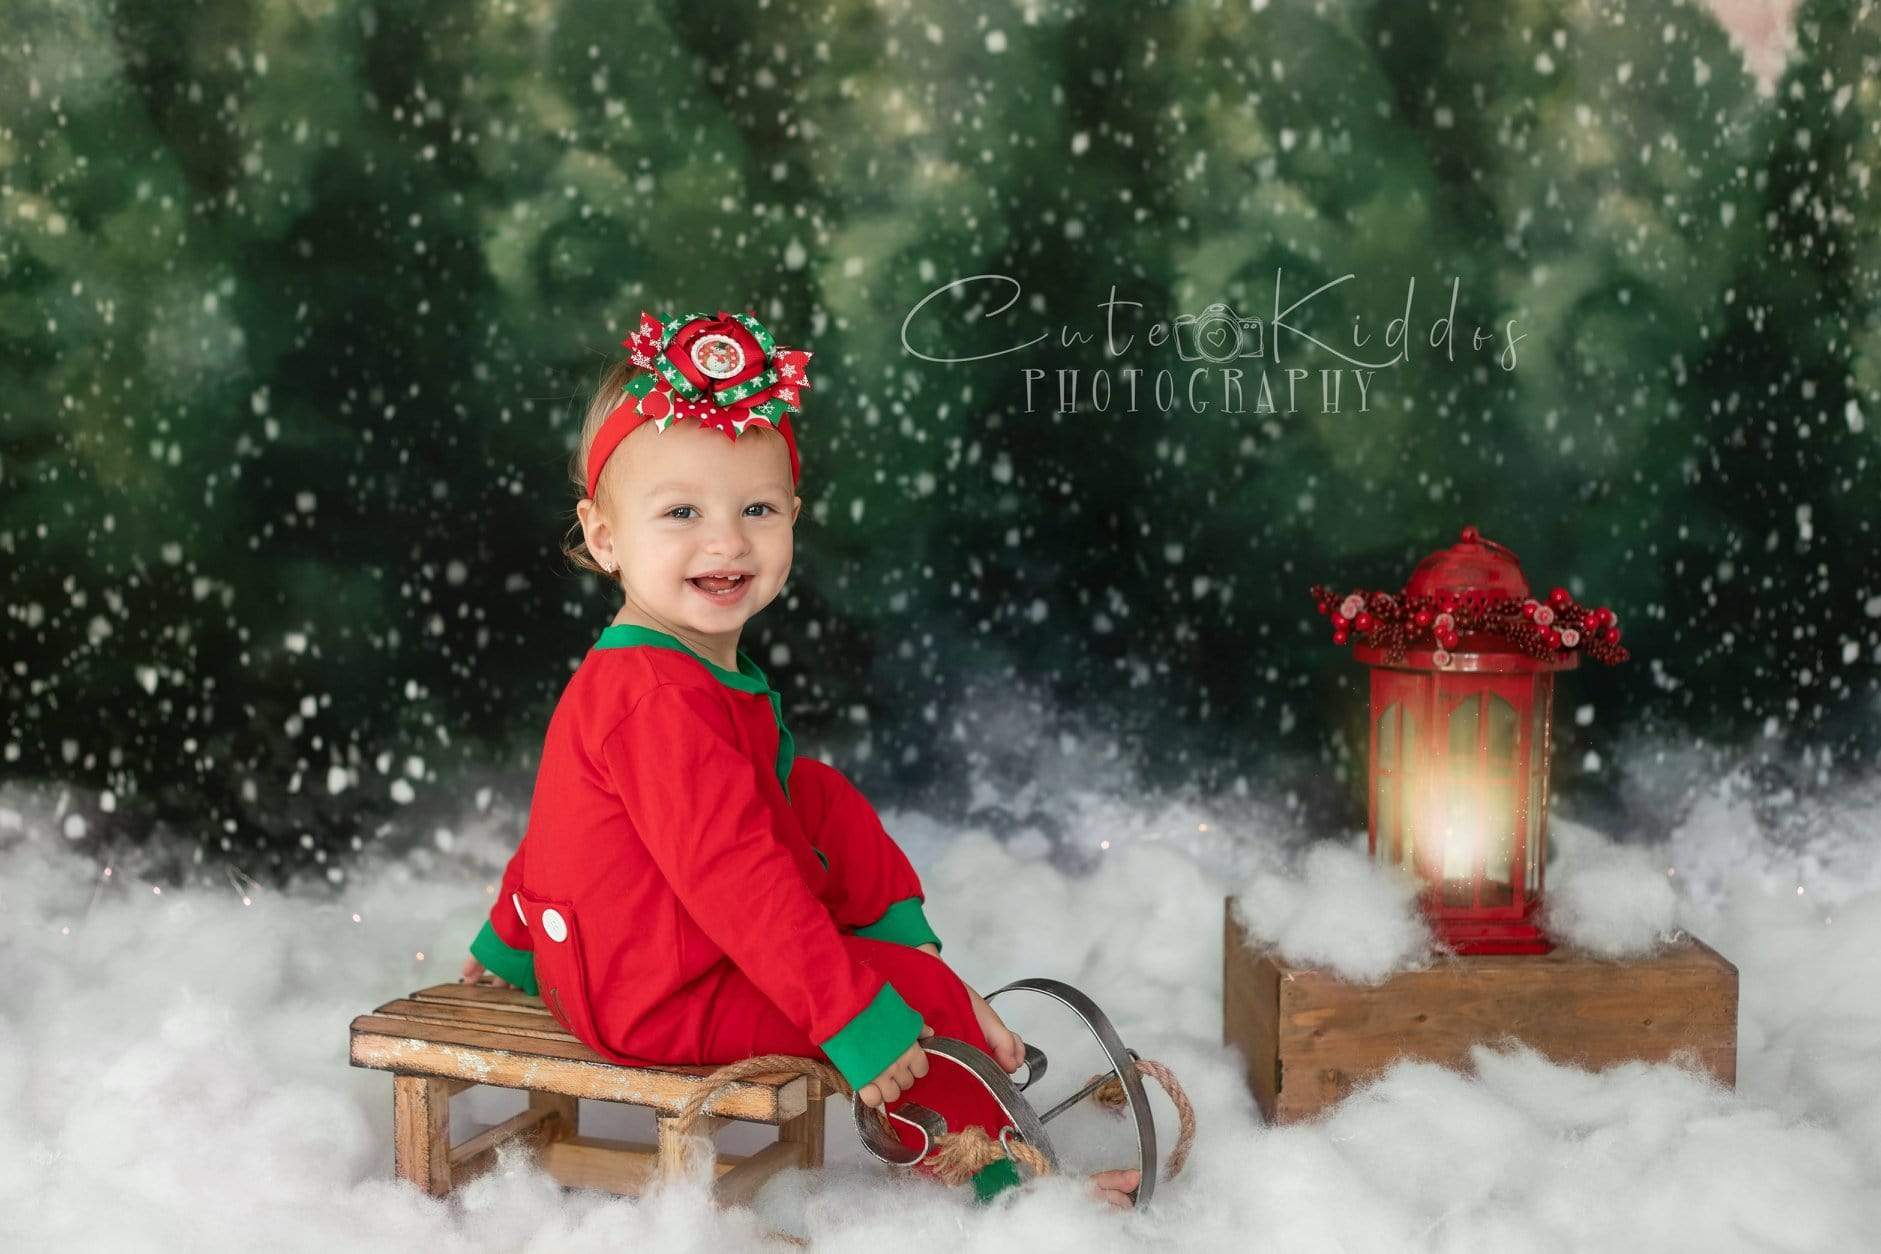 Katebackdrop：Kate Dazzling Winter Snowy Forest Backdrop for Photography Designed by Modest Brushes